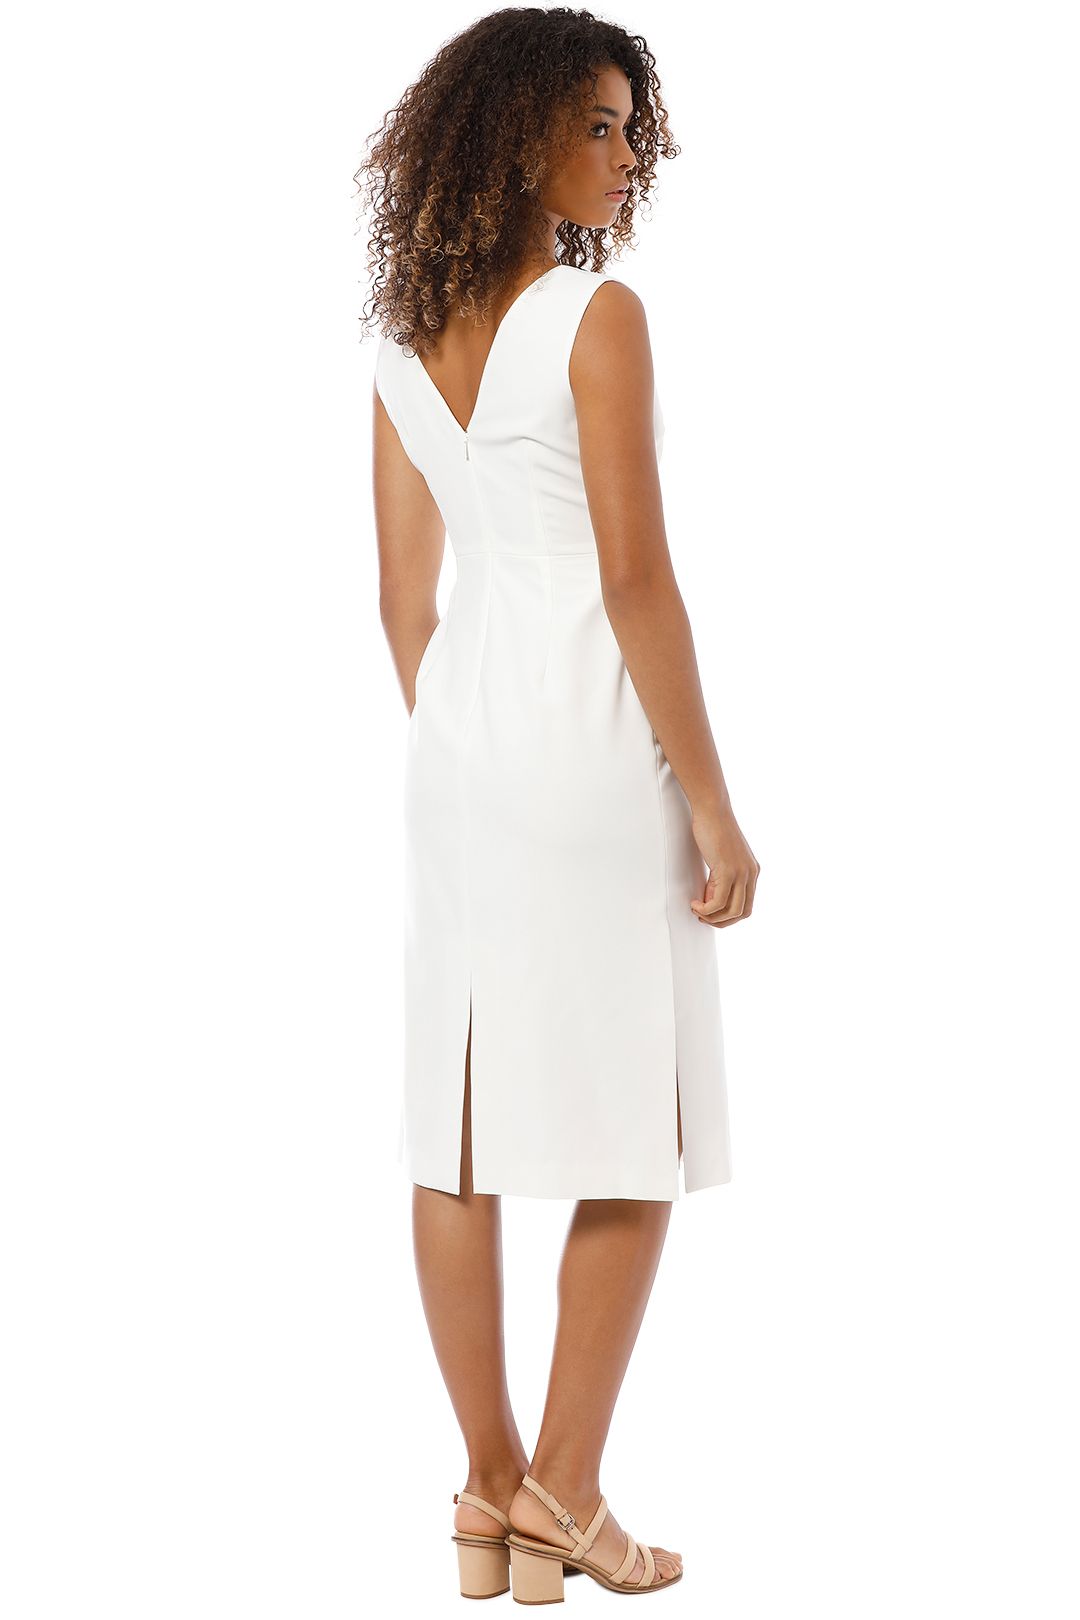 Friend of Audrey - Dylan Buttoned Dress - White - Back